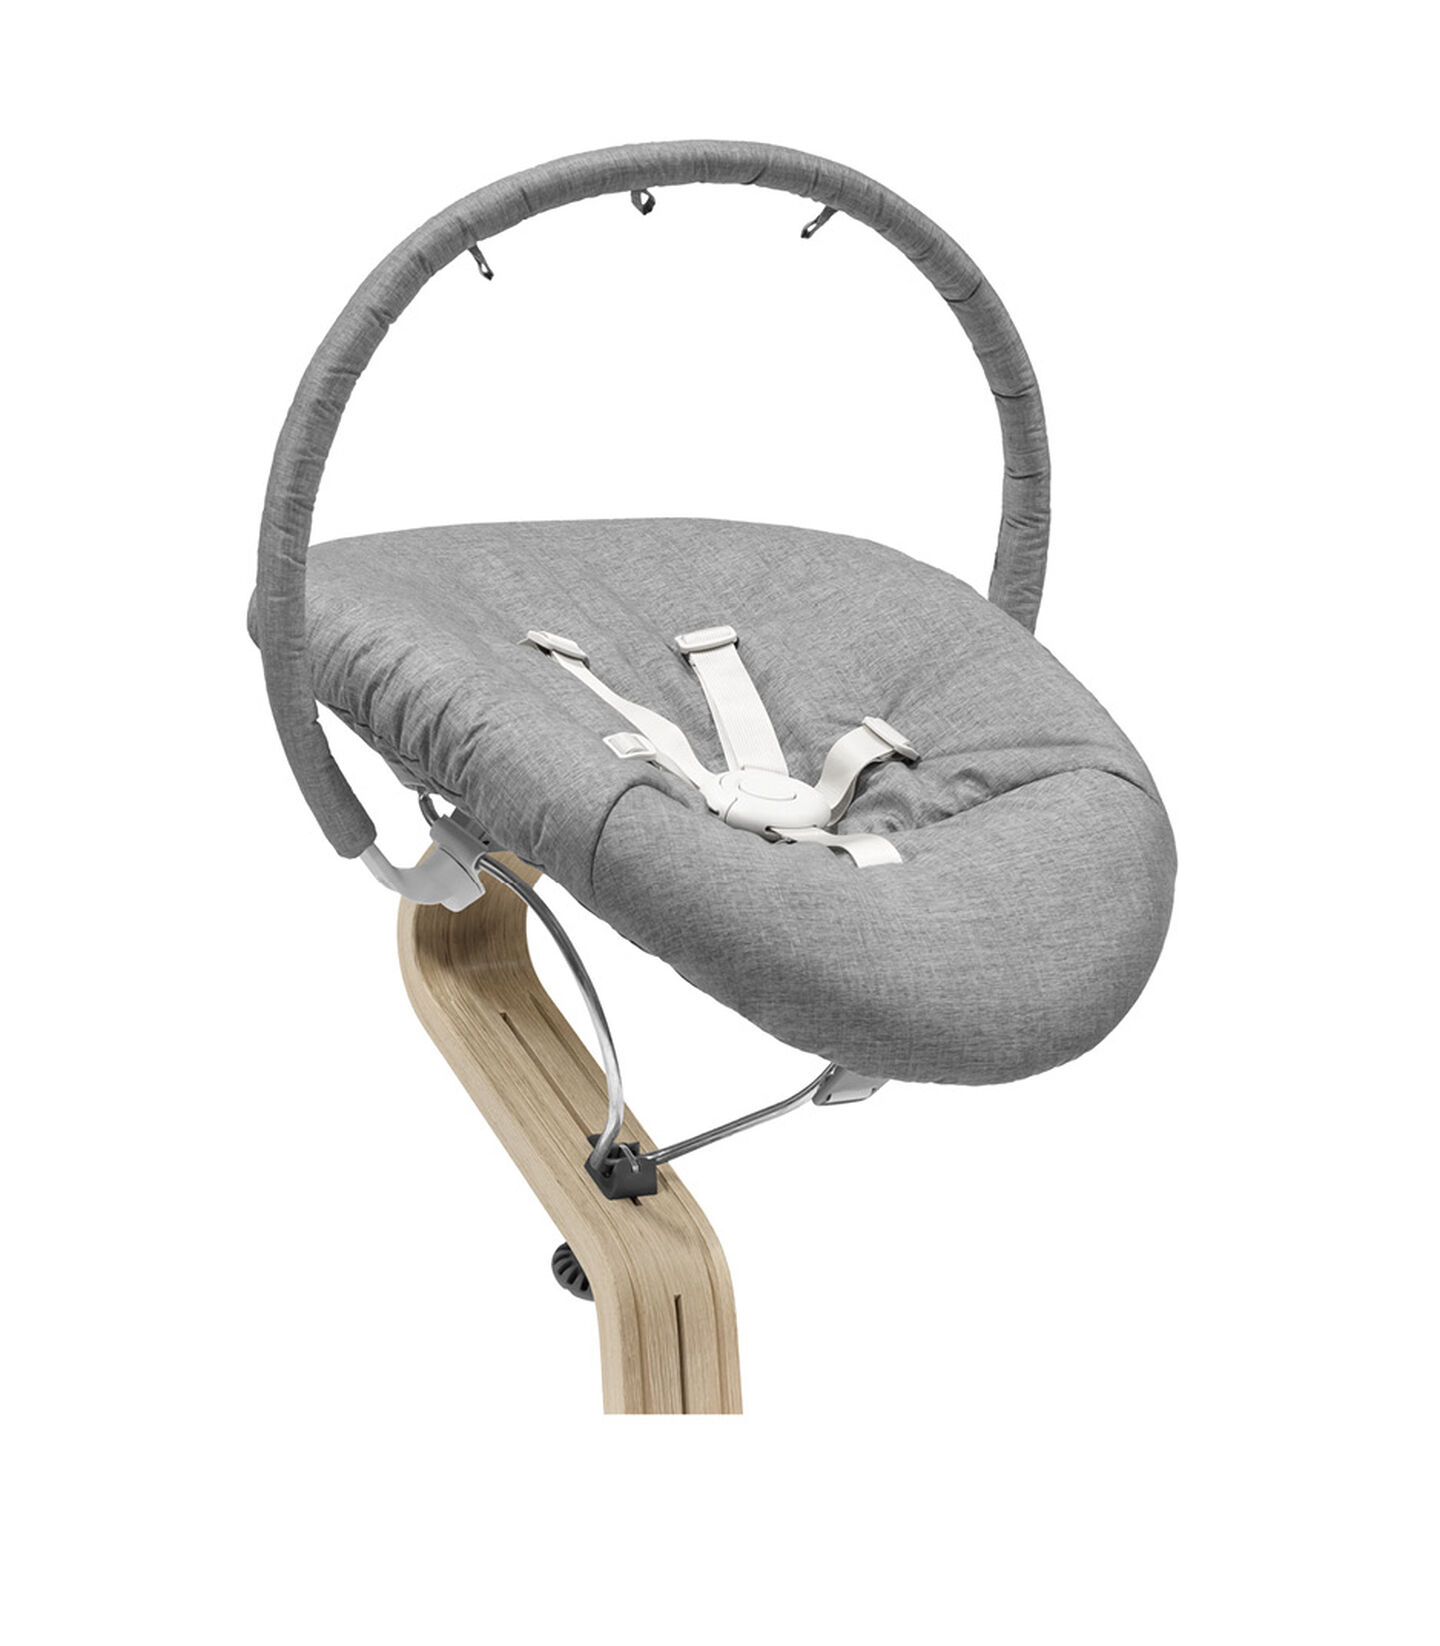 Stokke® Nomi® Play speelgoedhanger, Wit, mainview view 2